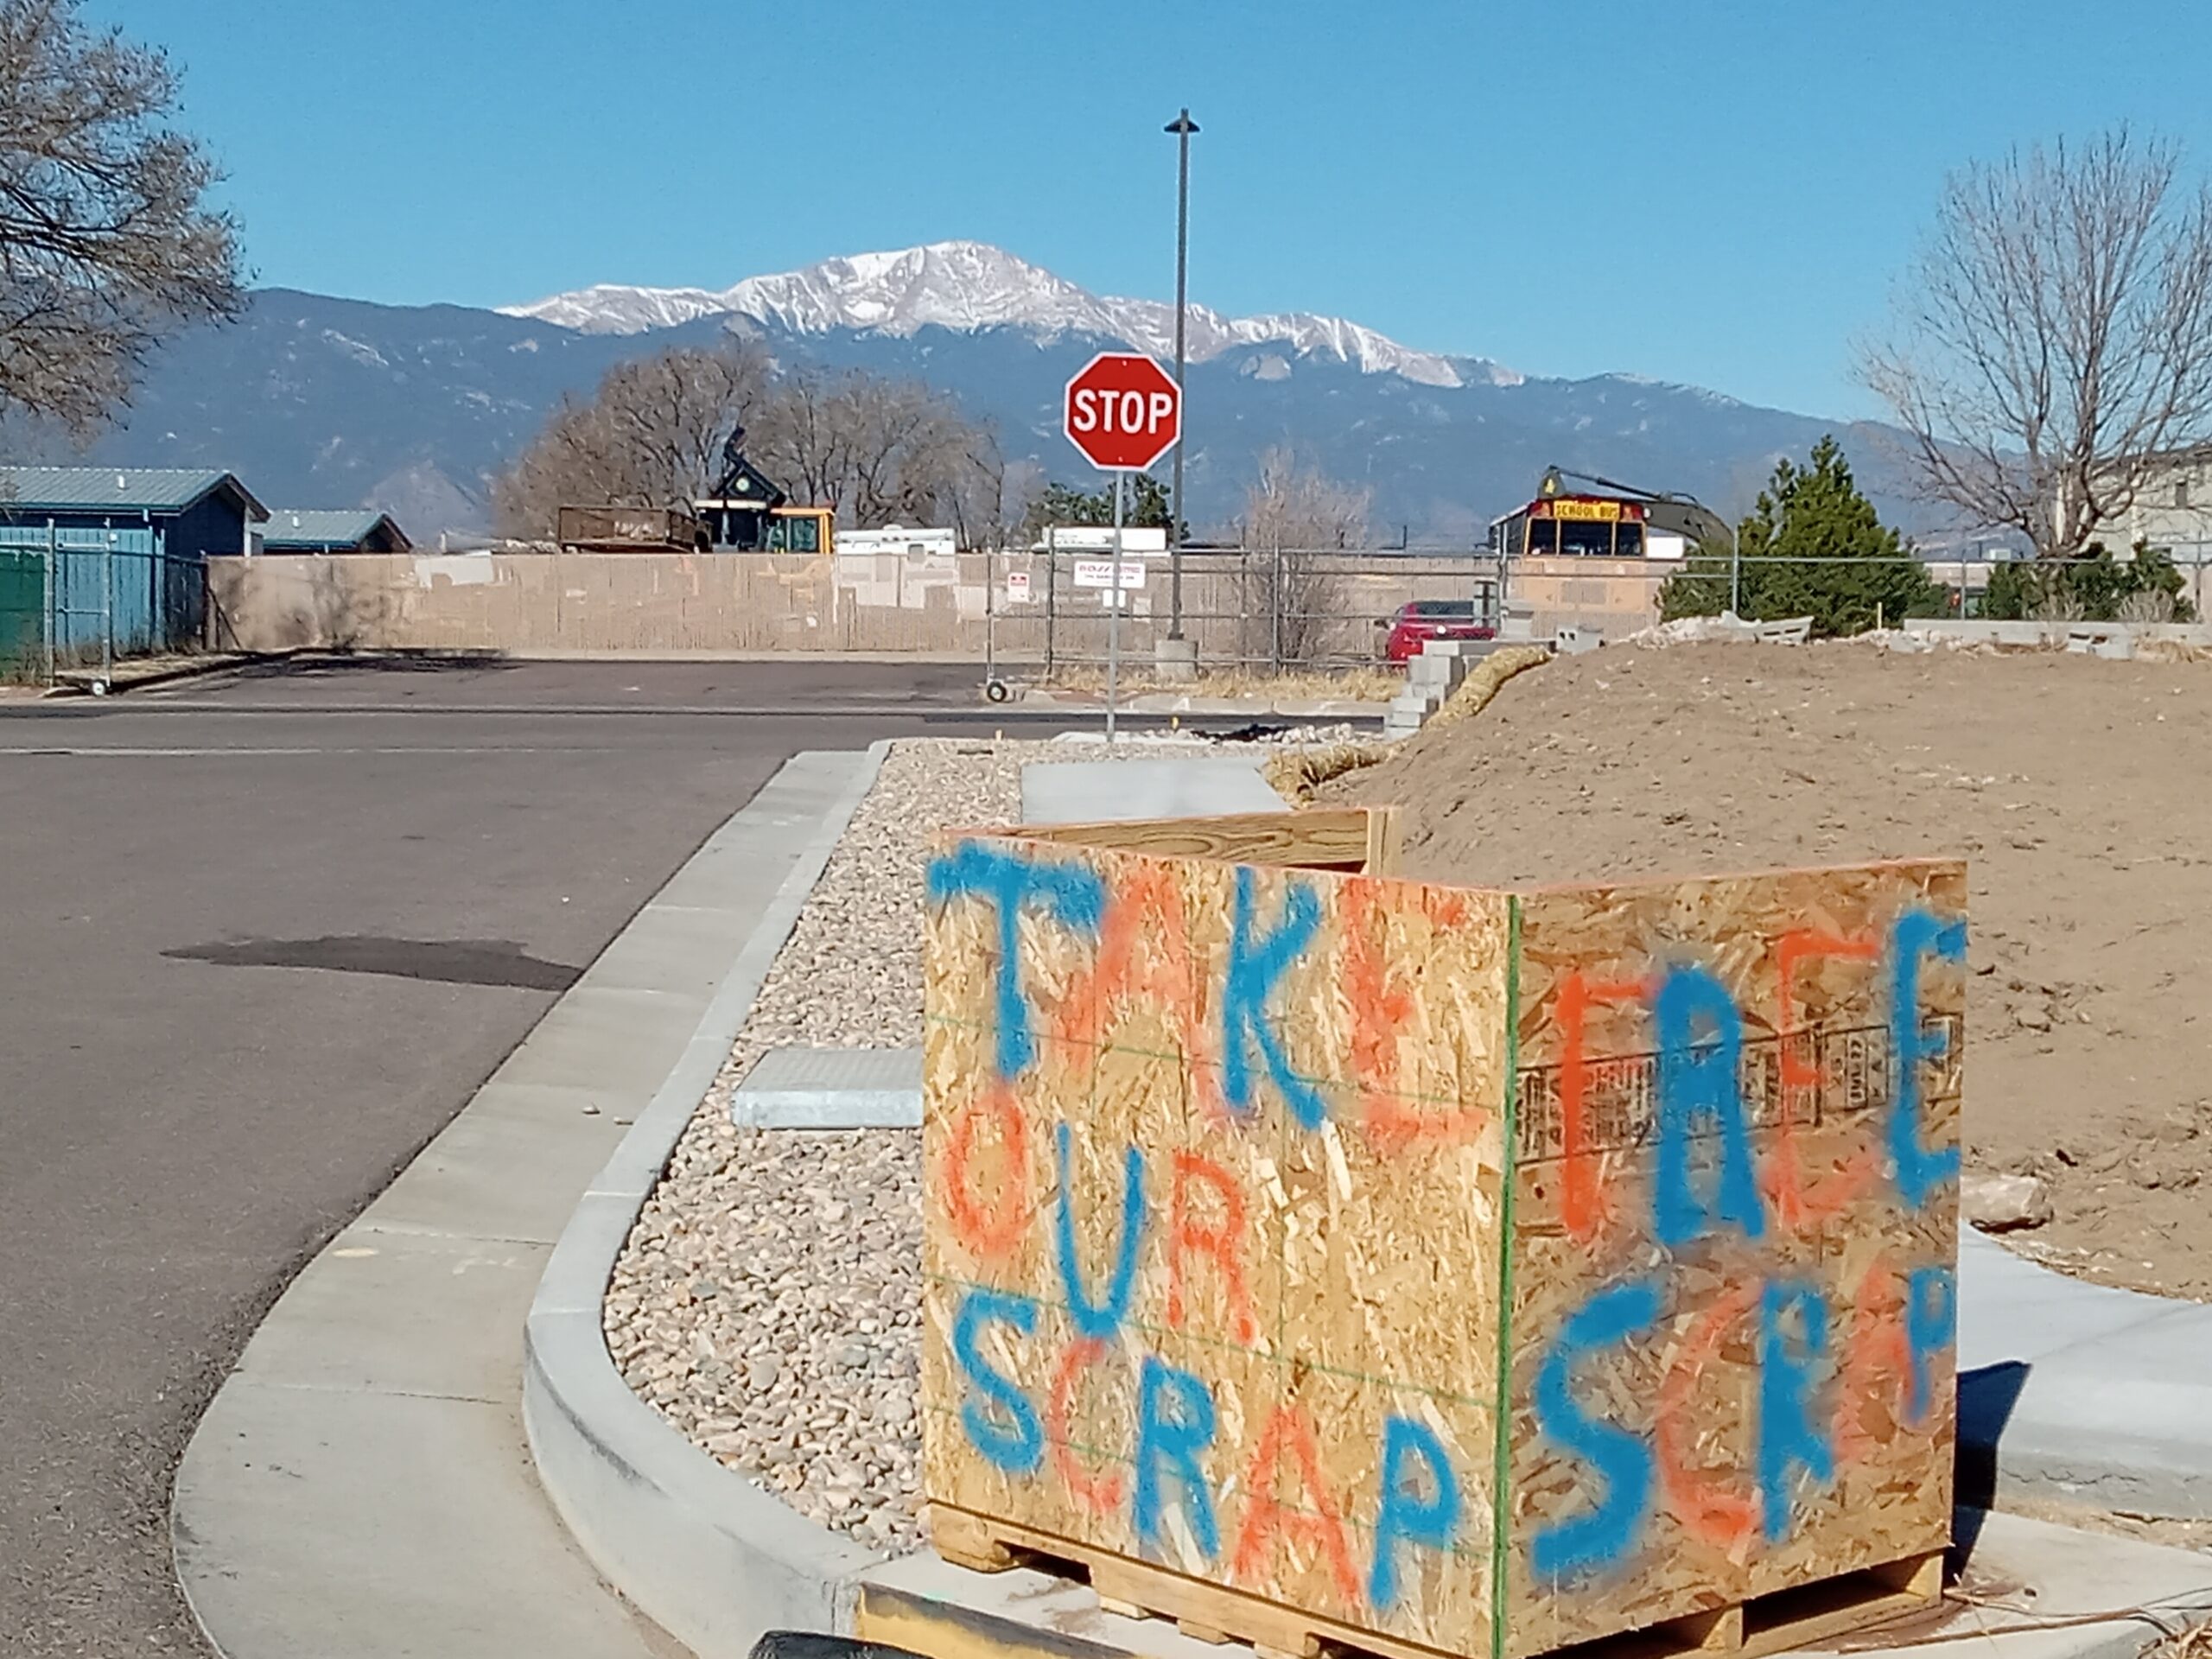 Wooden box that says "Take our scrap," with Pikes Peak in the background